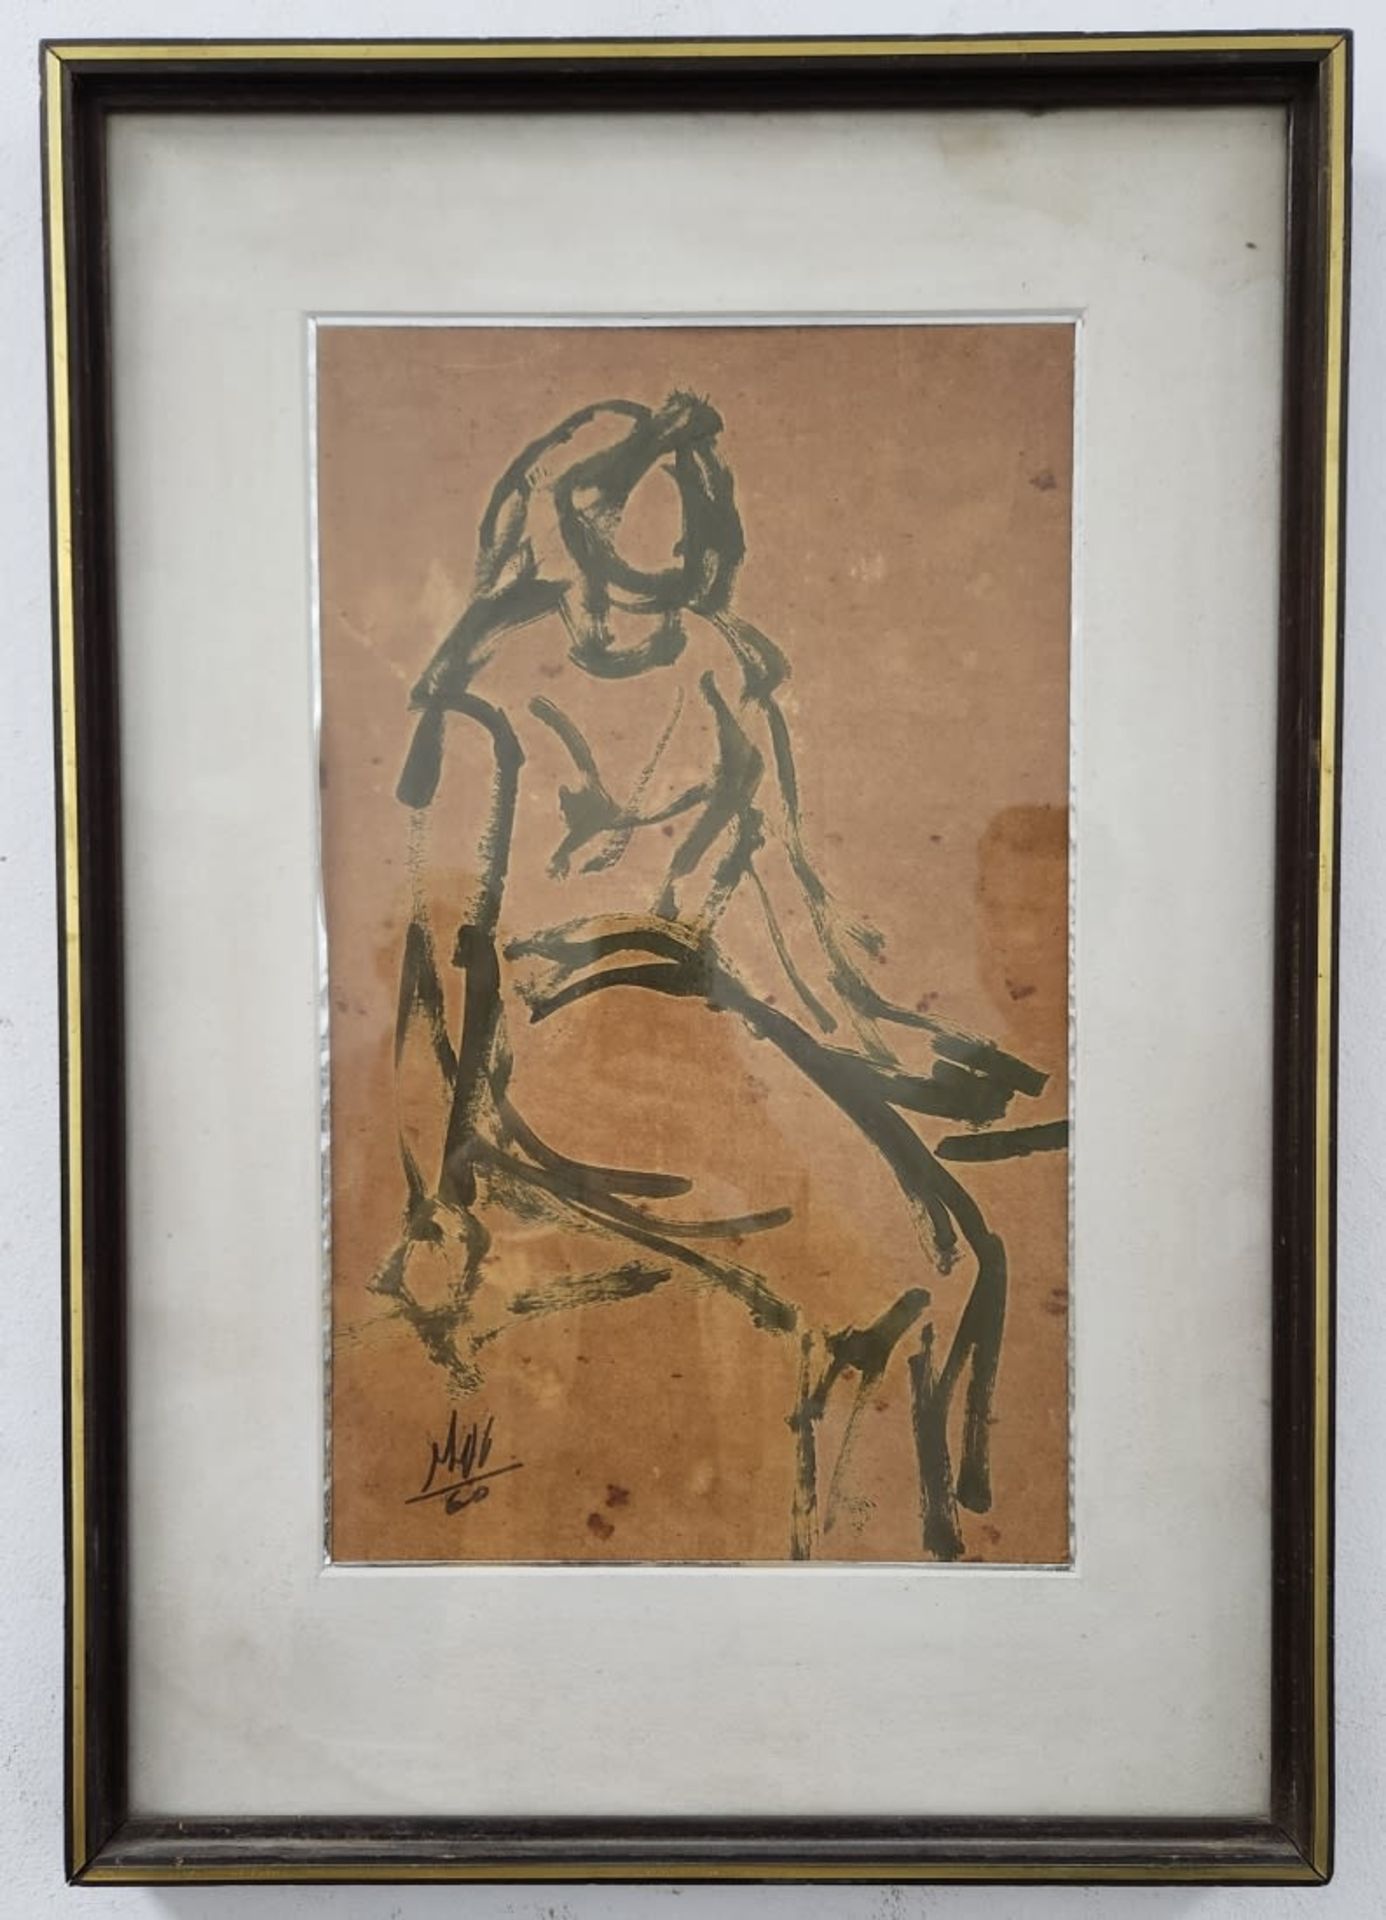 "Sitting on beige" - painting, samuel Tepler - gouache on paper, signed and dated 1960. - Image 2 of 3